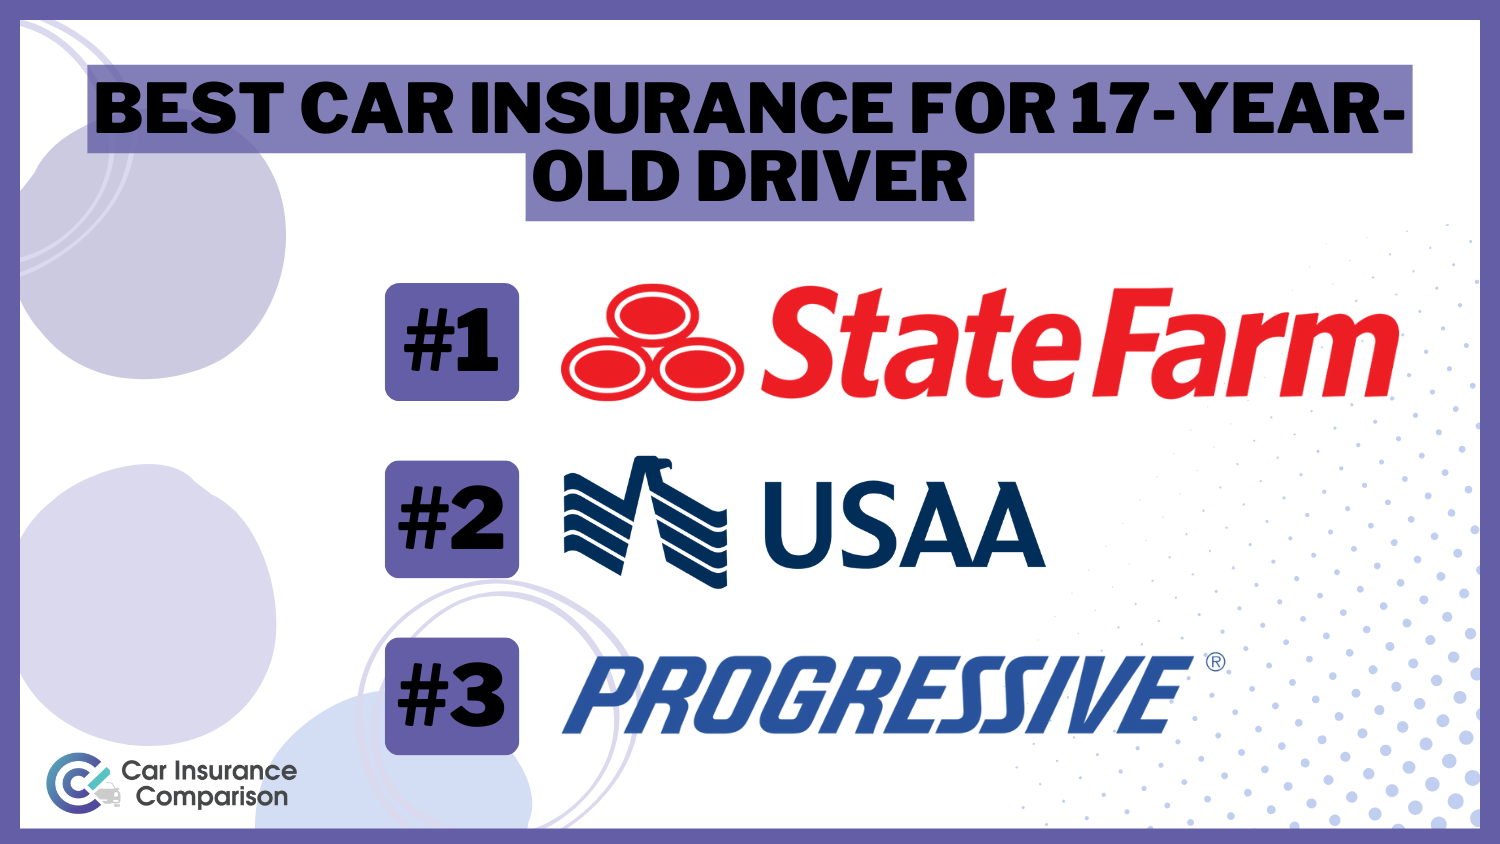 Best Car Insurance for 17-Year-Olds: State Farm, USAA and progressive